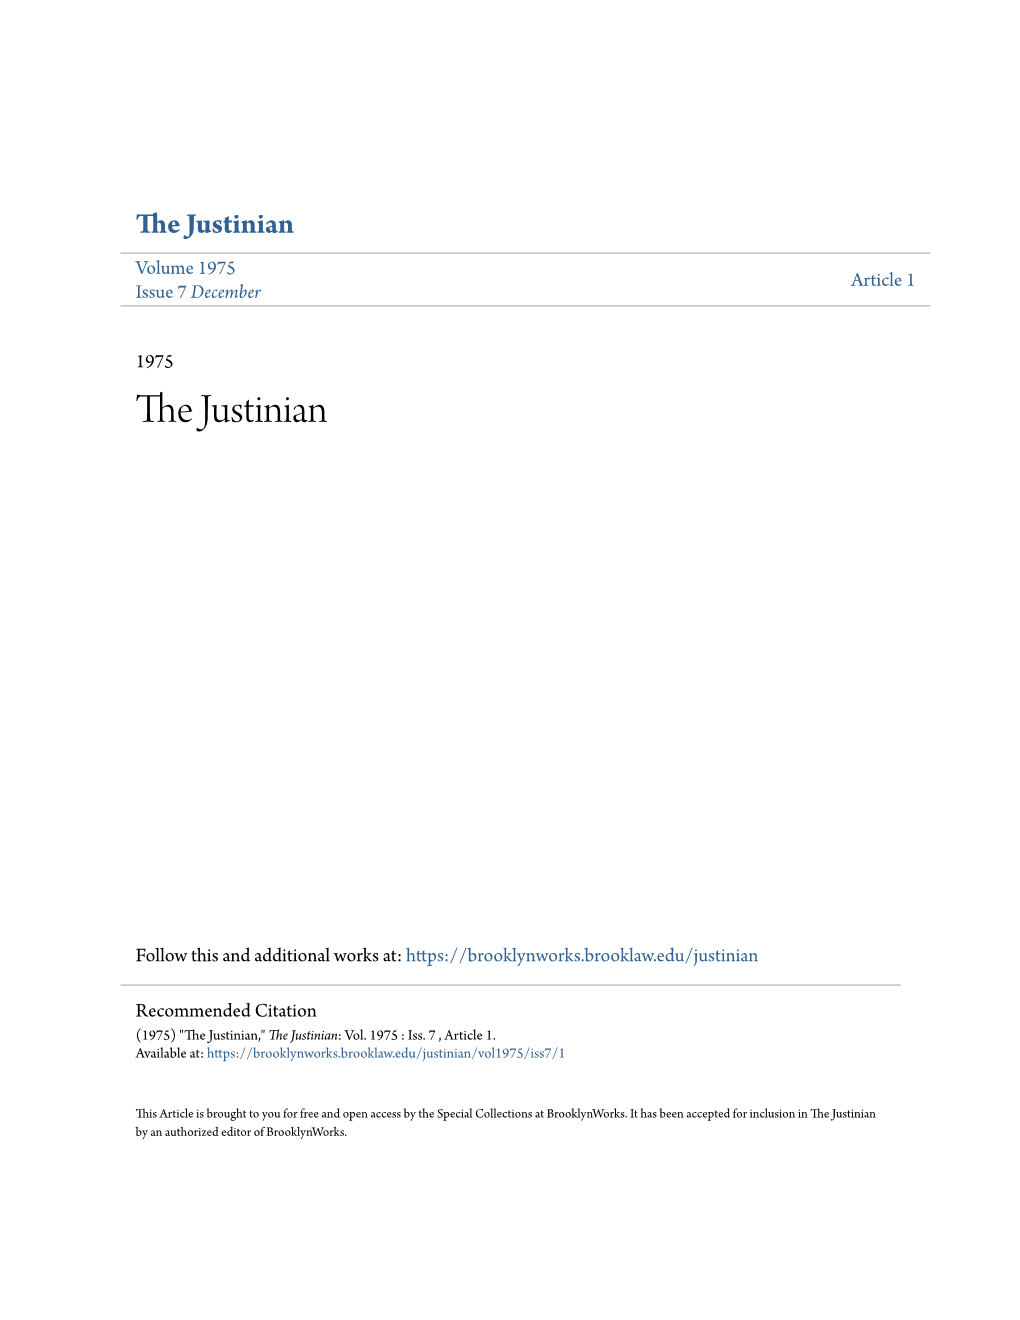 The Justinian Volume 1975 Article 1 Issue 7 December